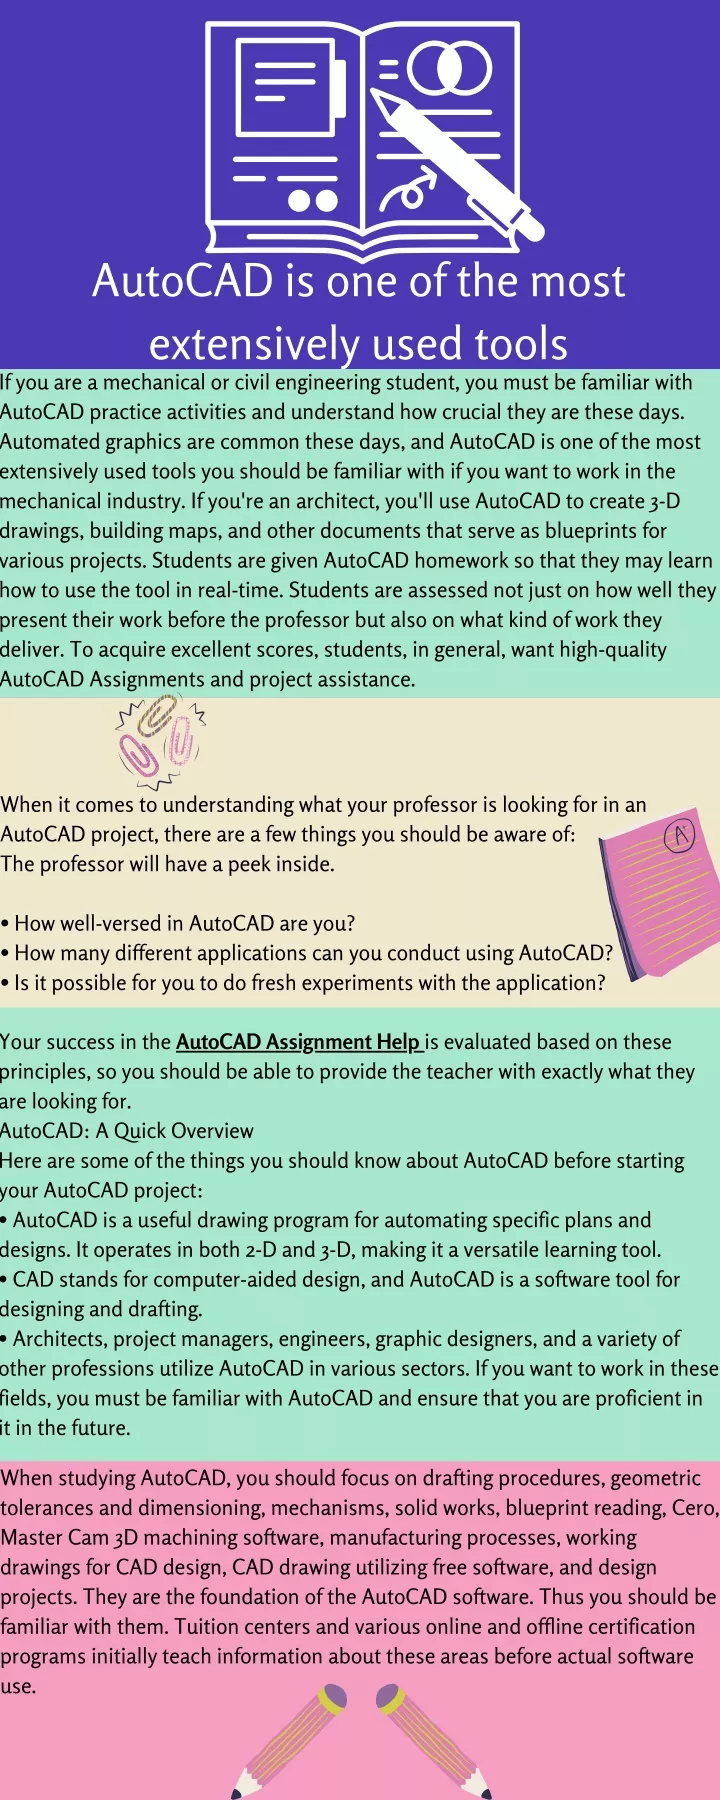 autocad is one of the most extensively used tools